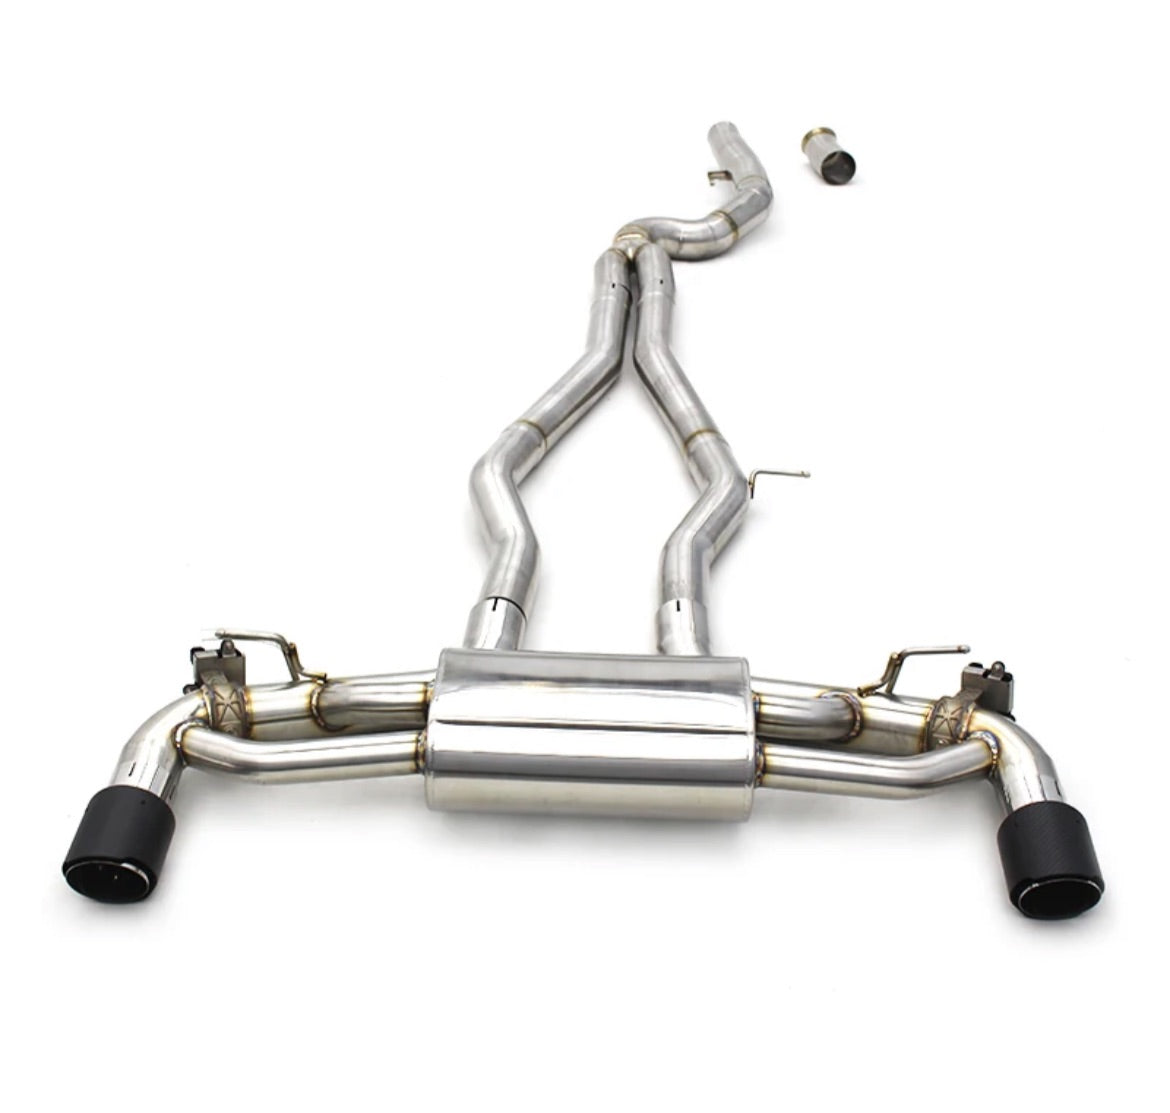 Supra A90/A91 Cen-Cal Valved Catback Exhaust (Stainless Steel)